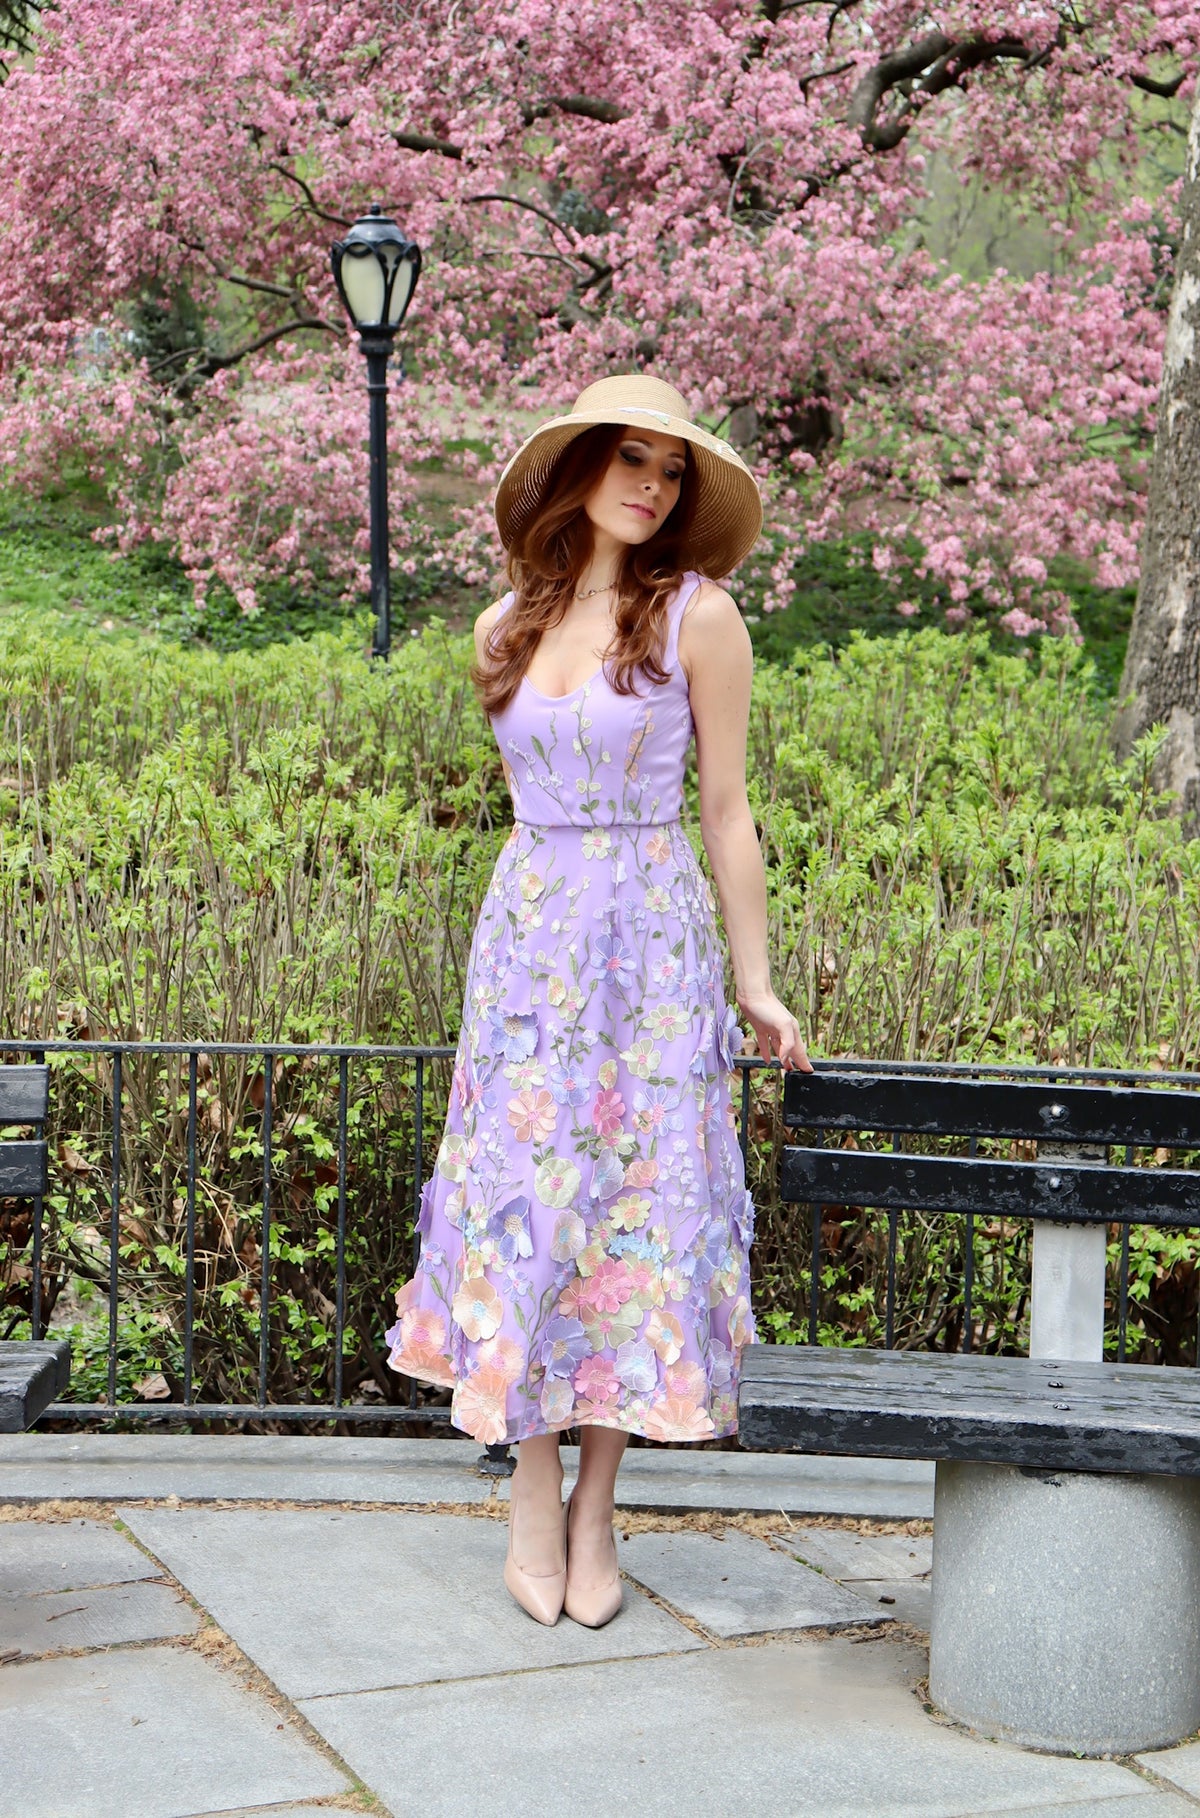 Model standing near park bench in lilac midi length appliquéd floral dress with floral applique detail straw sun hat.